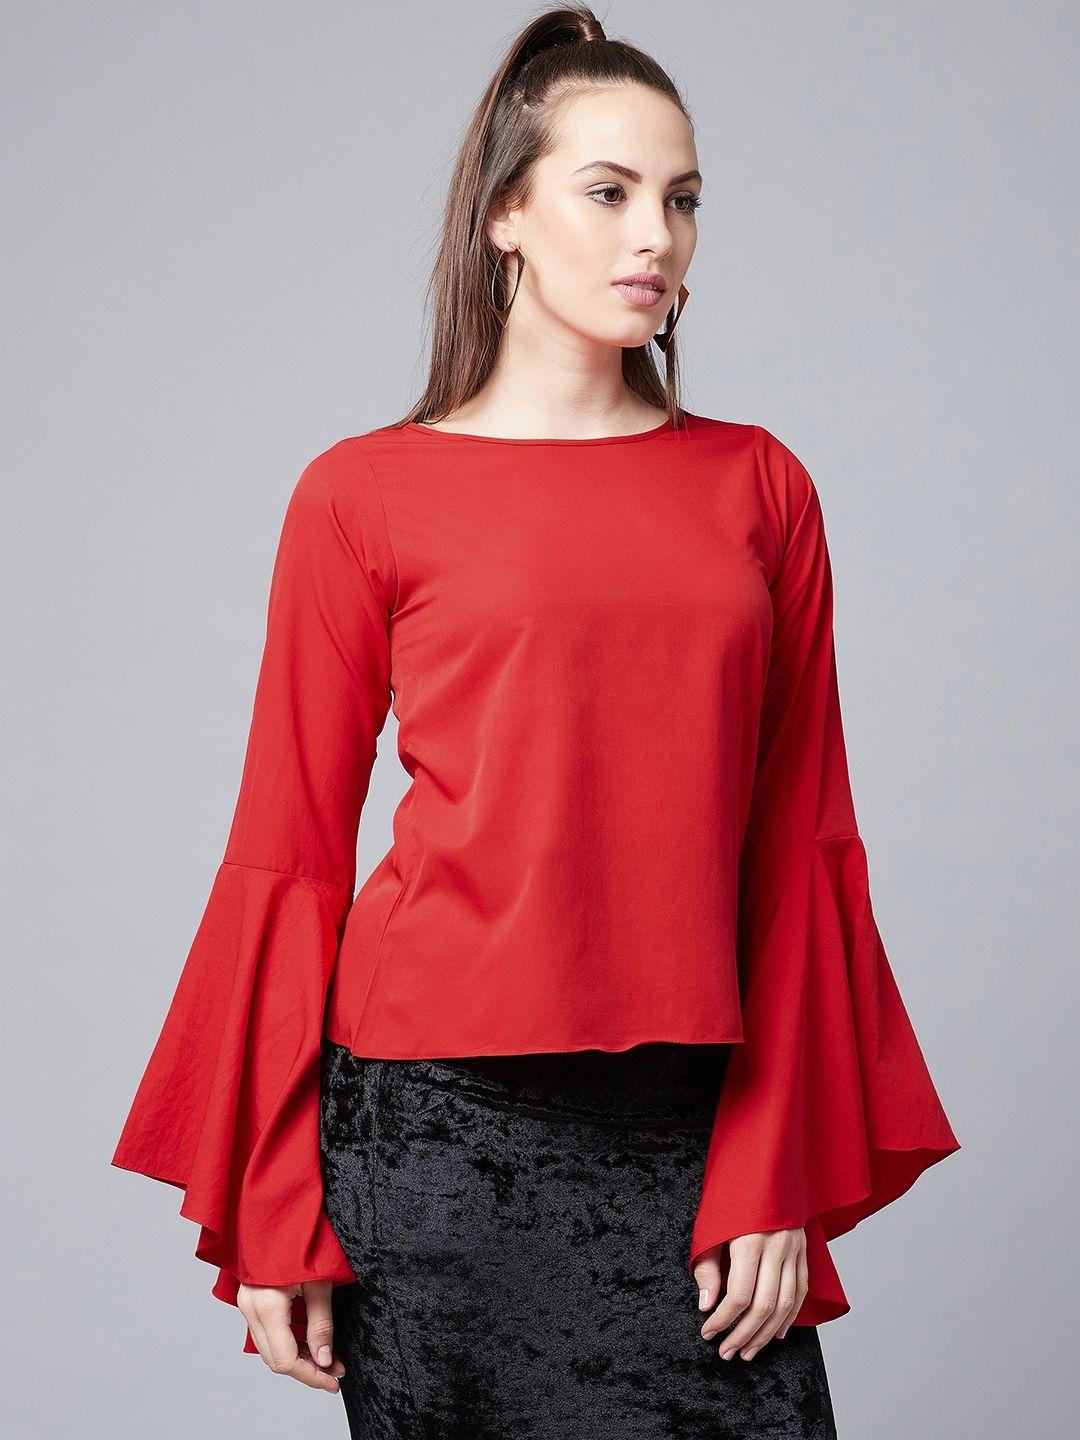 athena women red solid top